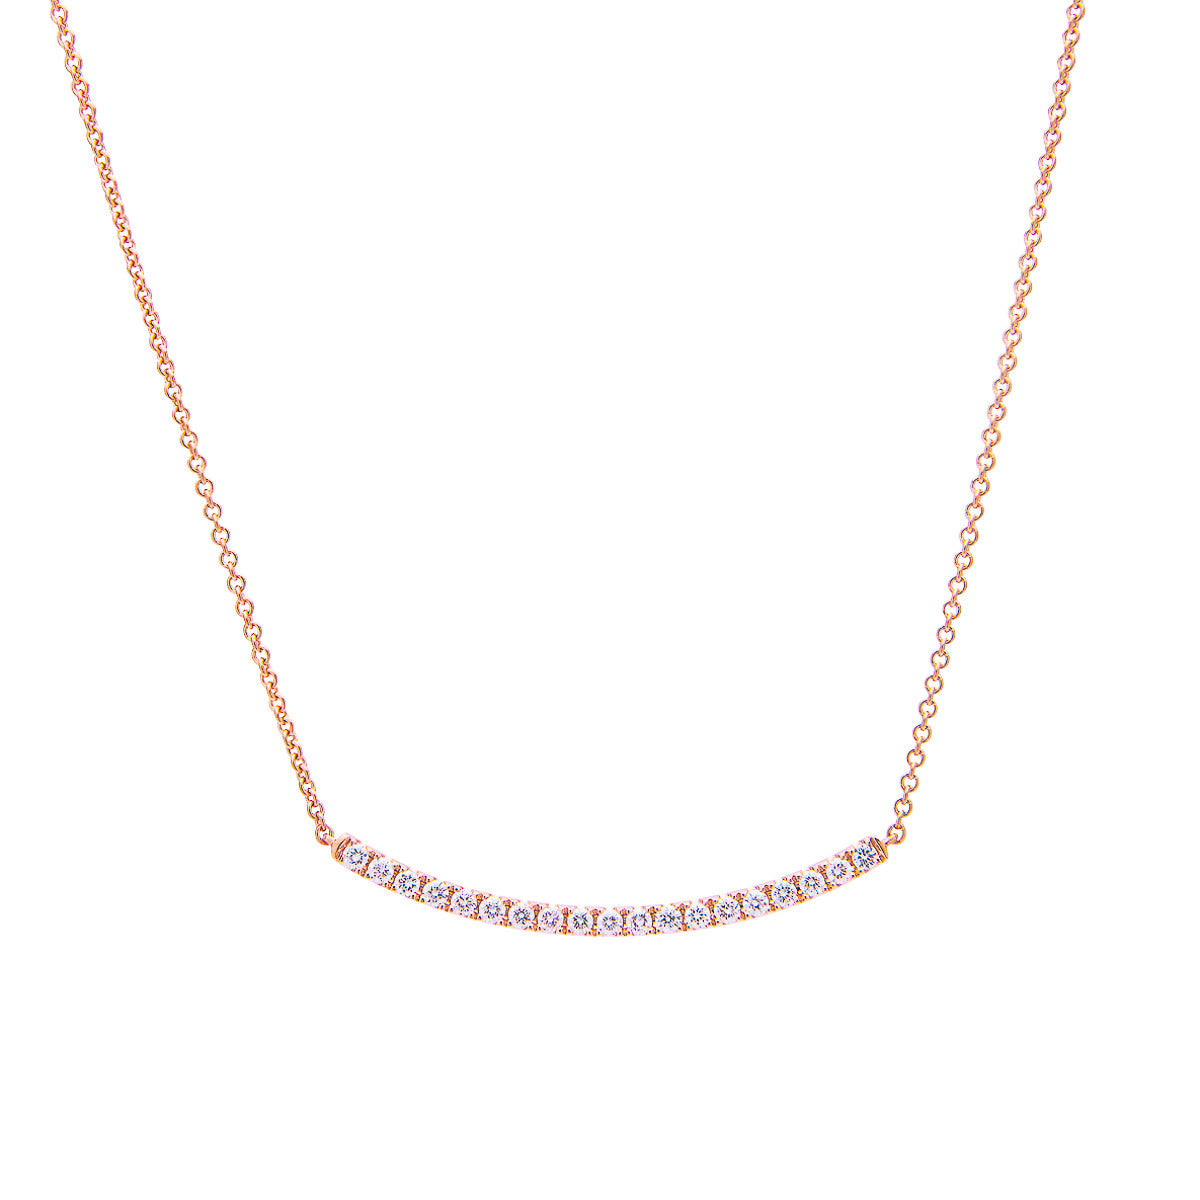 Sabel Collection 18K Rose Gold Curved Round Diamond Necklace